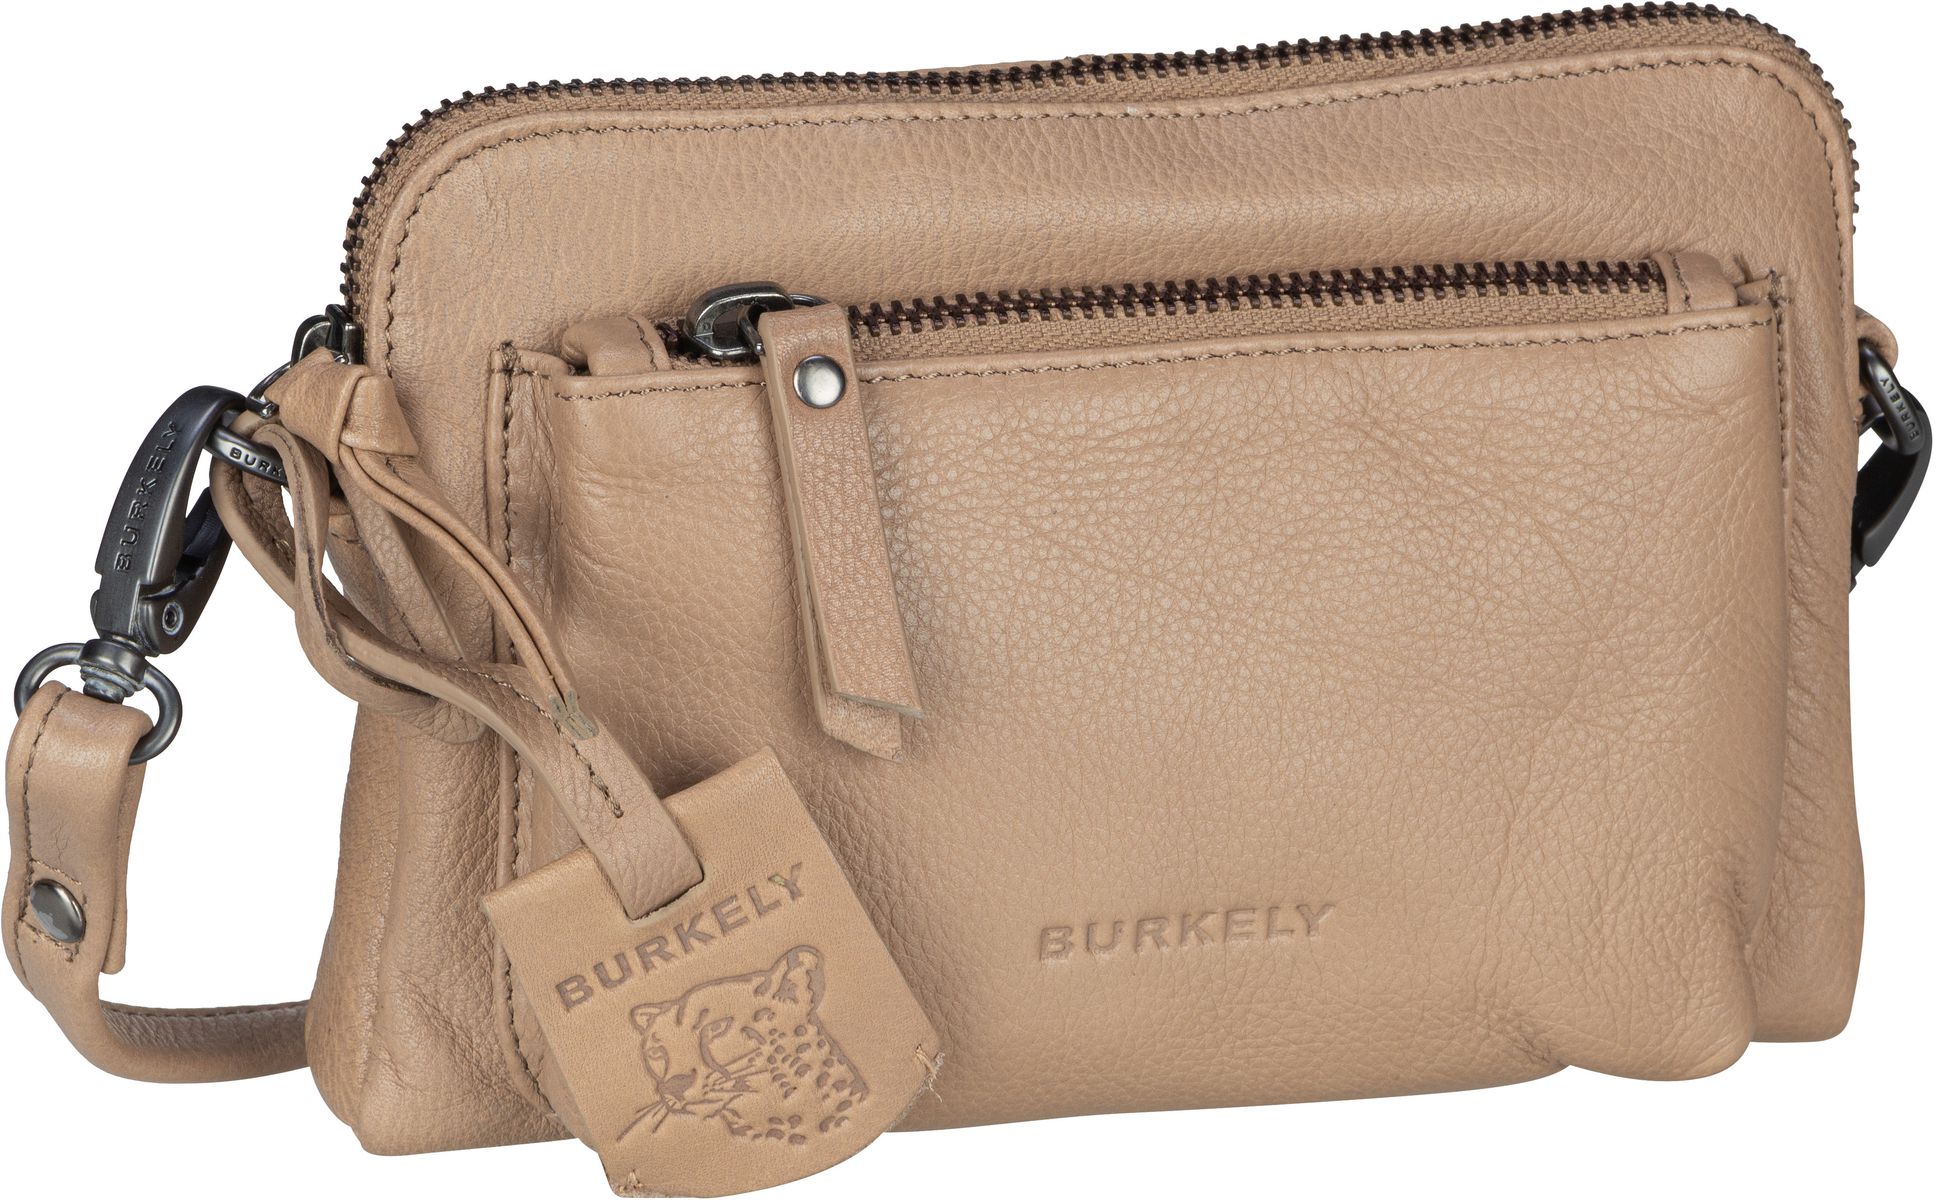 Burkely Just Jolie Minibag - Taupe